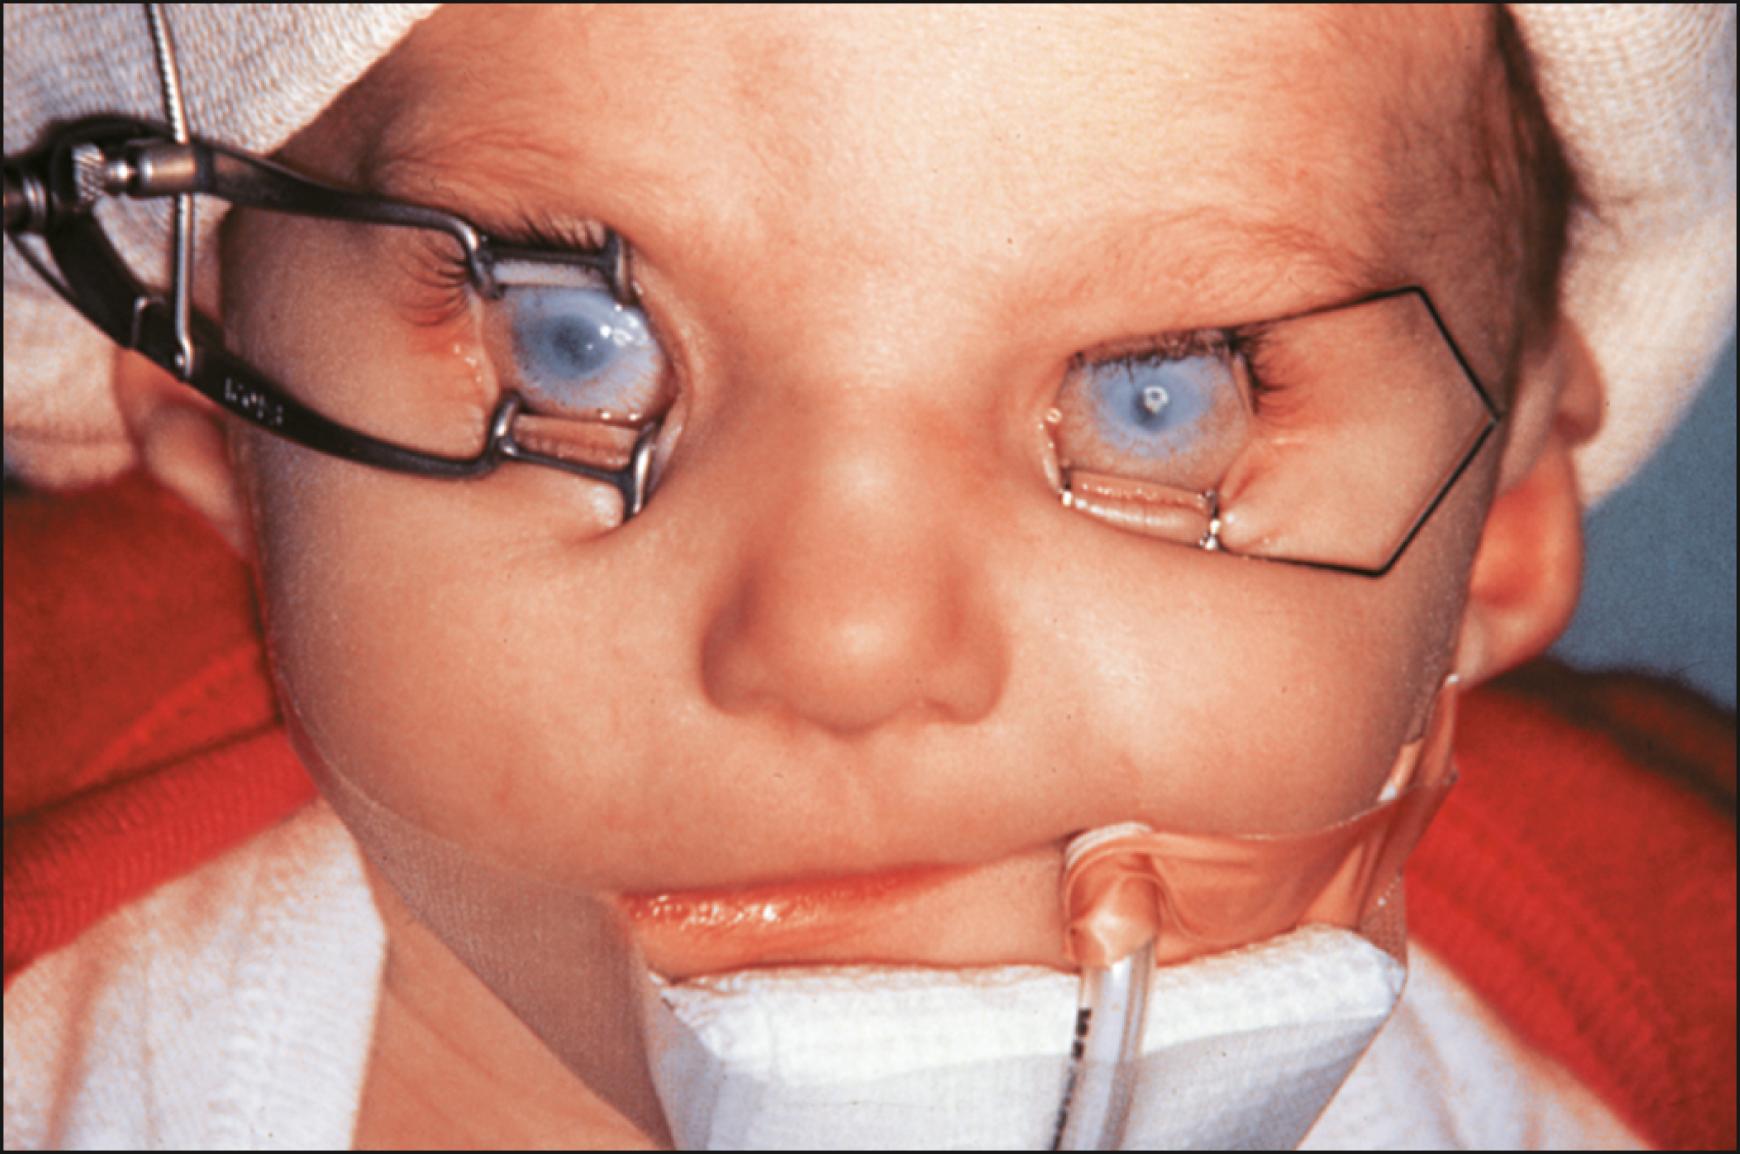 Fig. 18.1, An infant with sclerocornea being examined under general anesthesia.